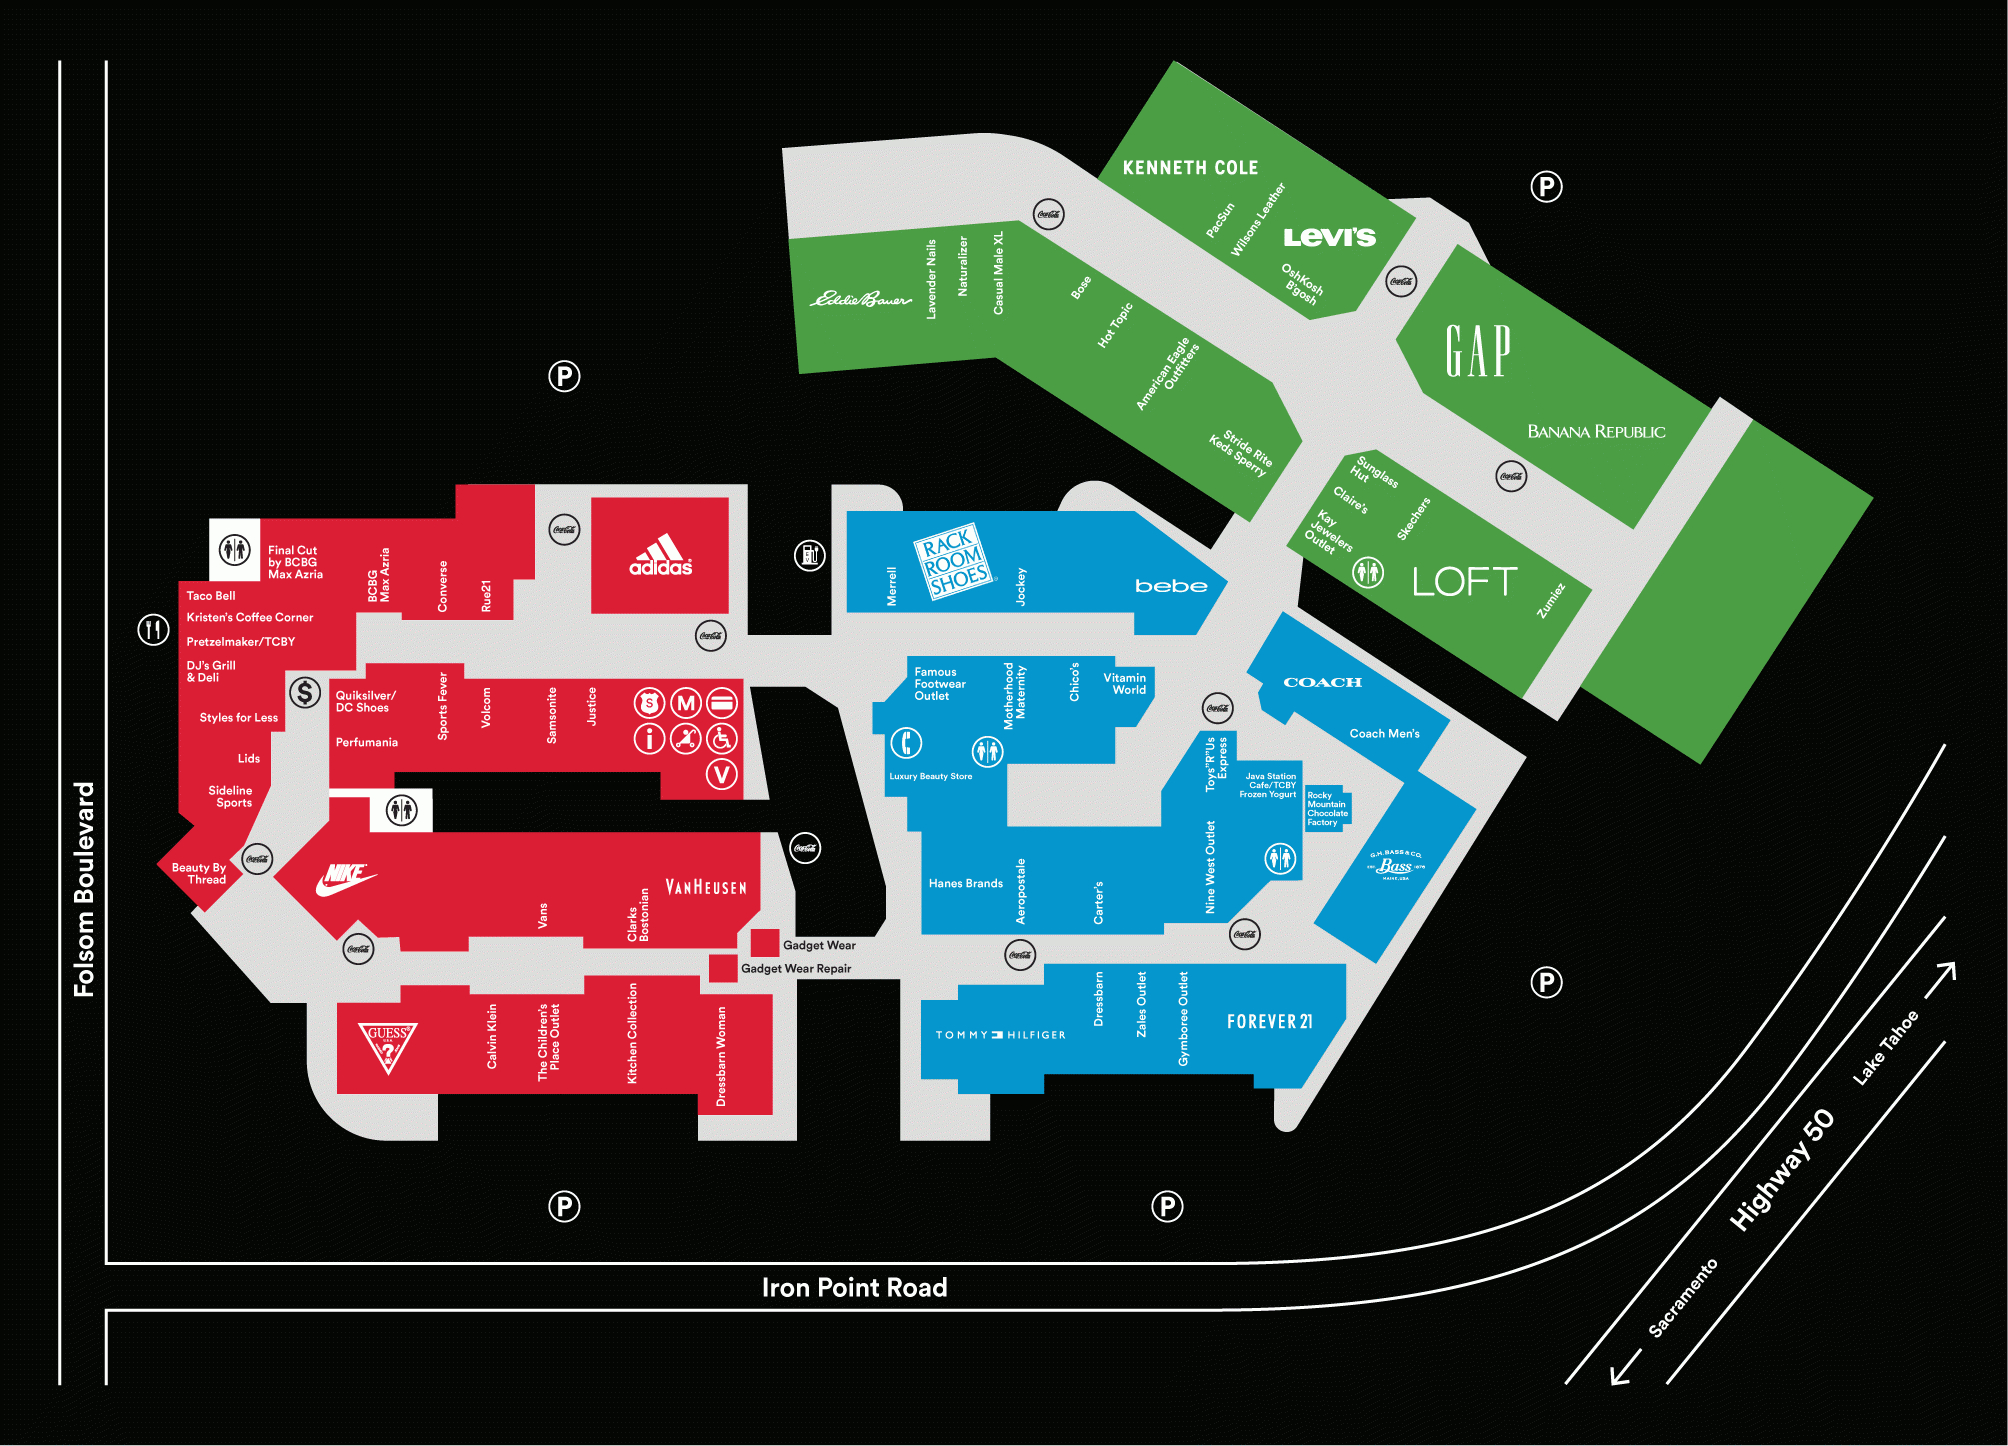 Welcome To Folsom Premium Outlets® - A Shopping Center In Folsom, Ca - Outlet California Map